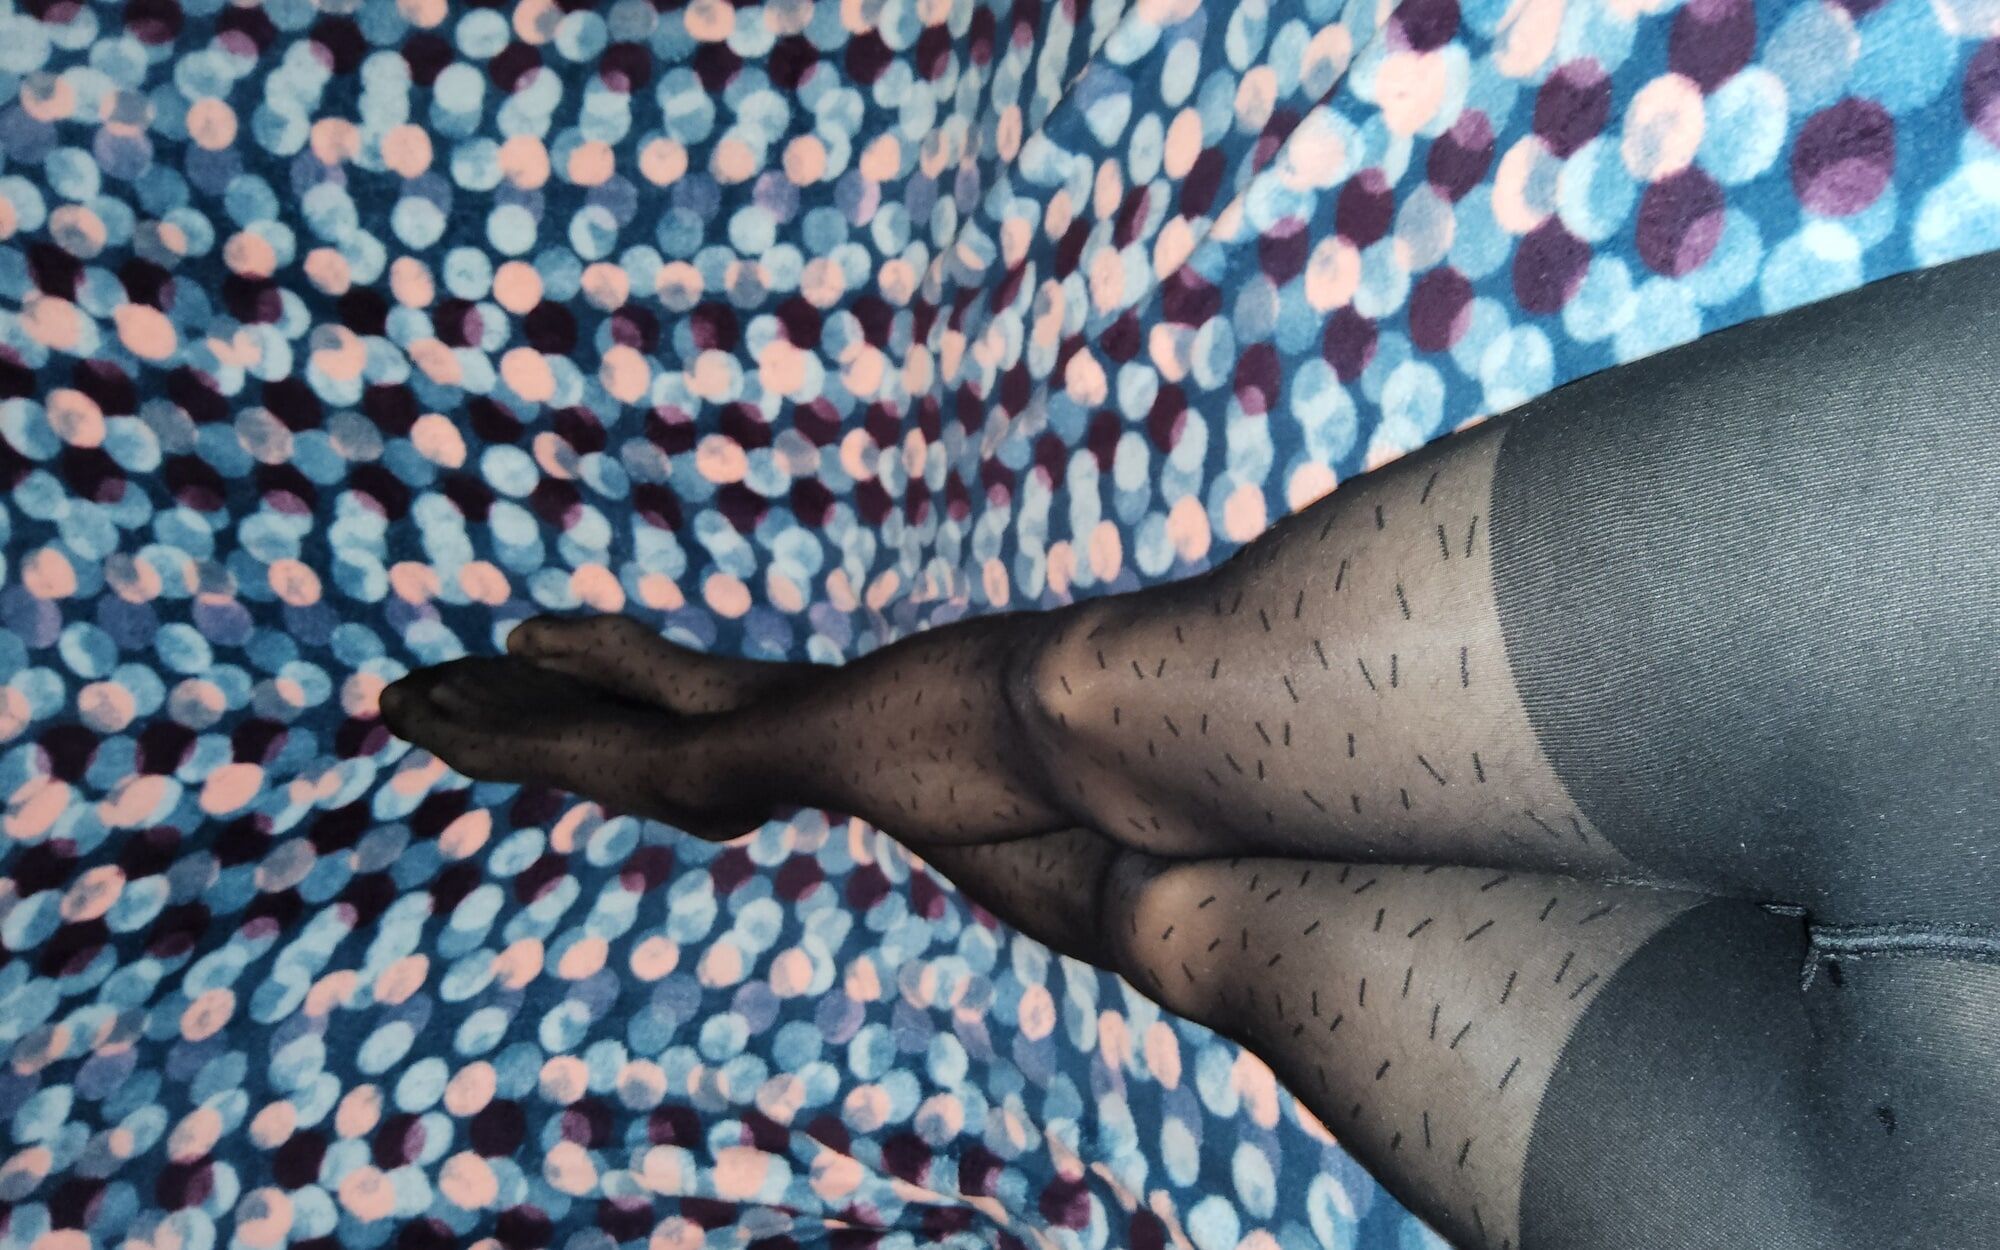 Another Black Pantyhose #3